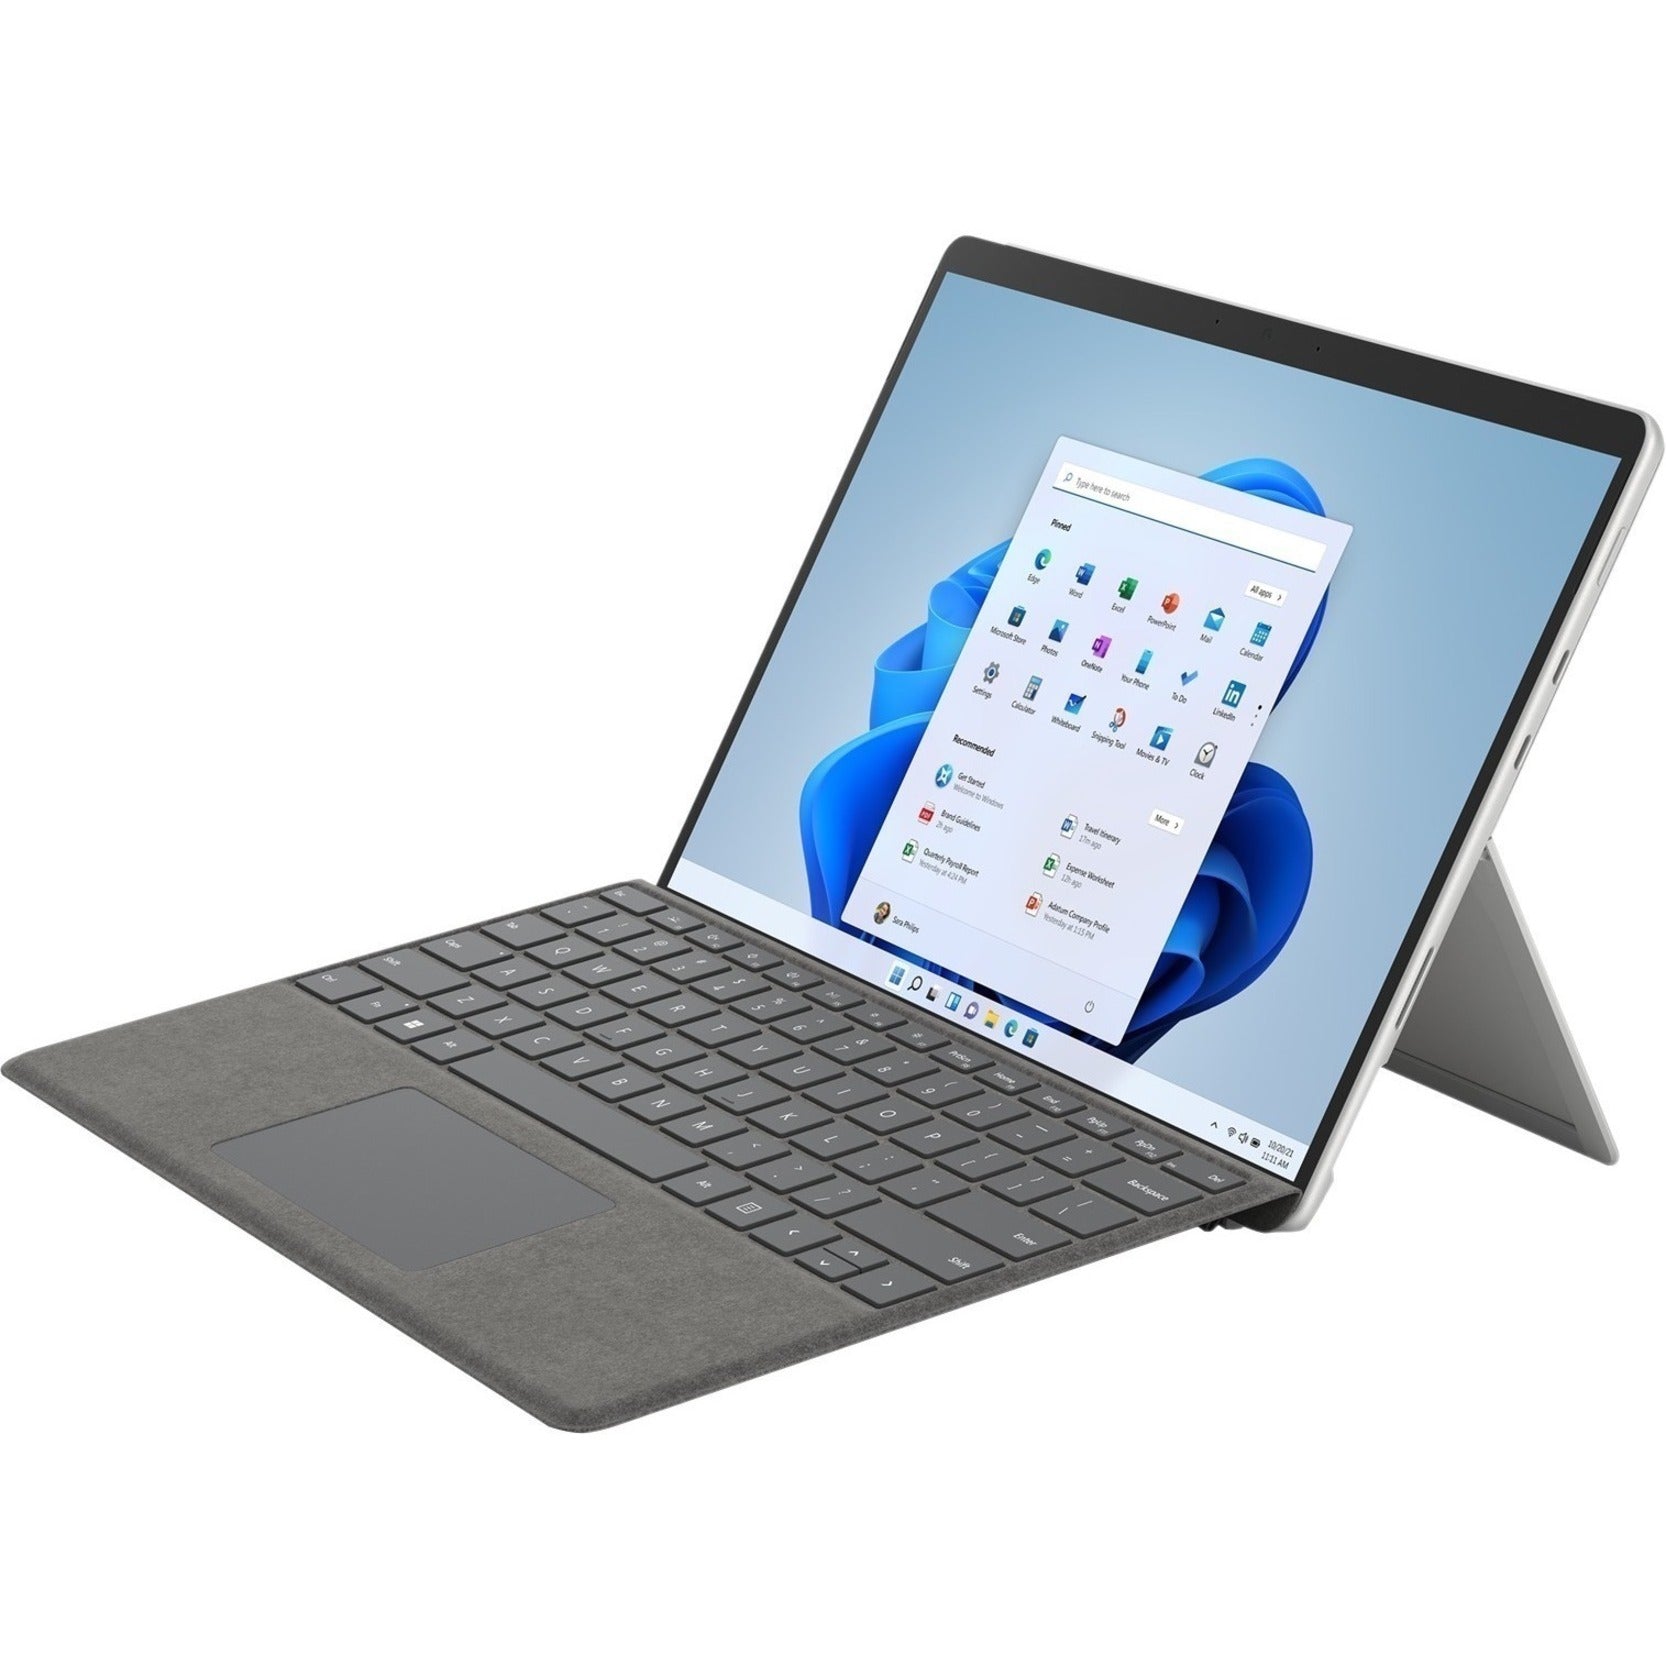 Microsoft SURFACE PROJECT AB 3 COMM TAA SC ENGLISH A1 PLATINUM (EB9-00003) [Discontinued]